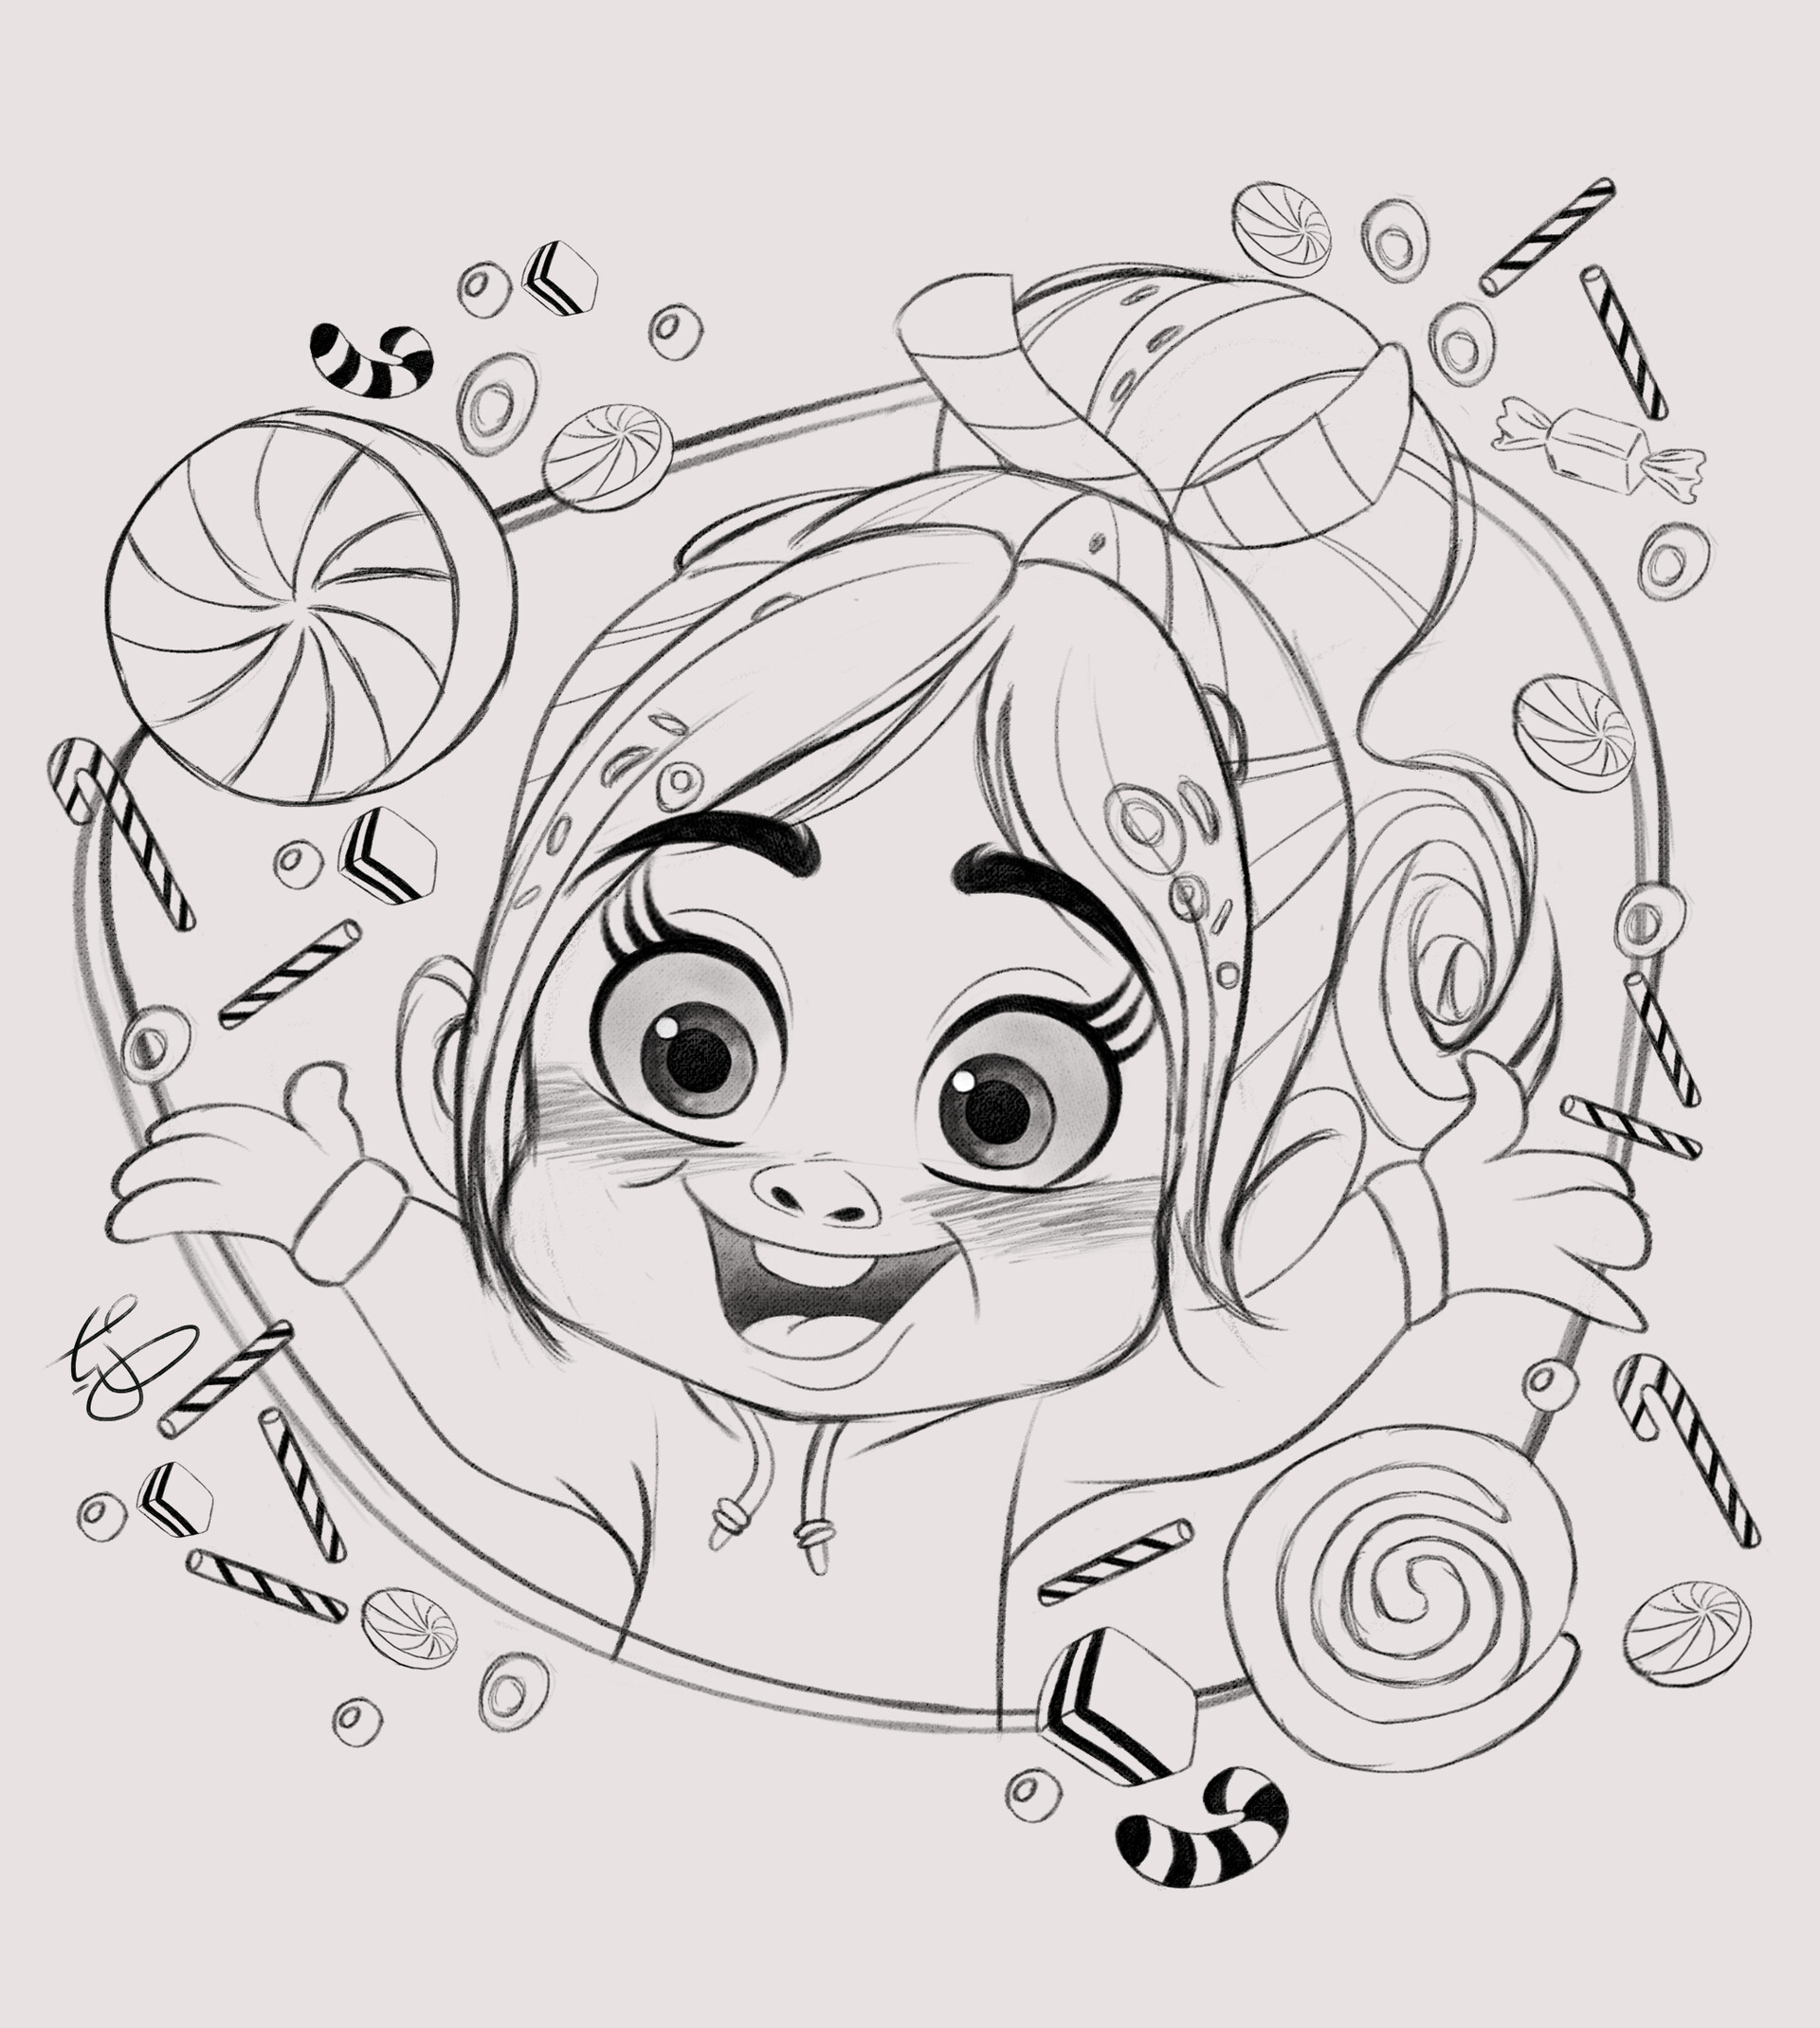 vanellope coloring pages